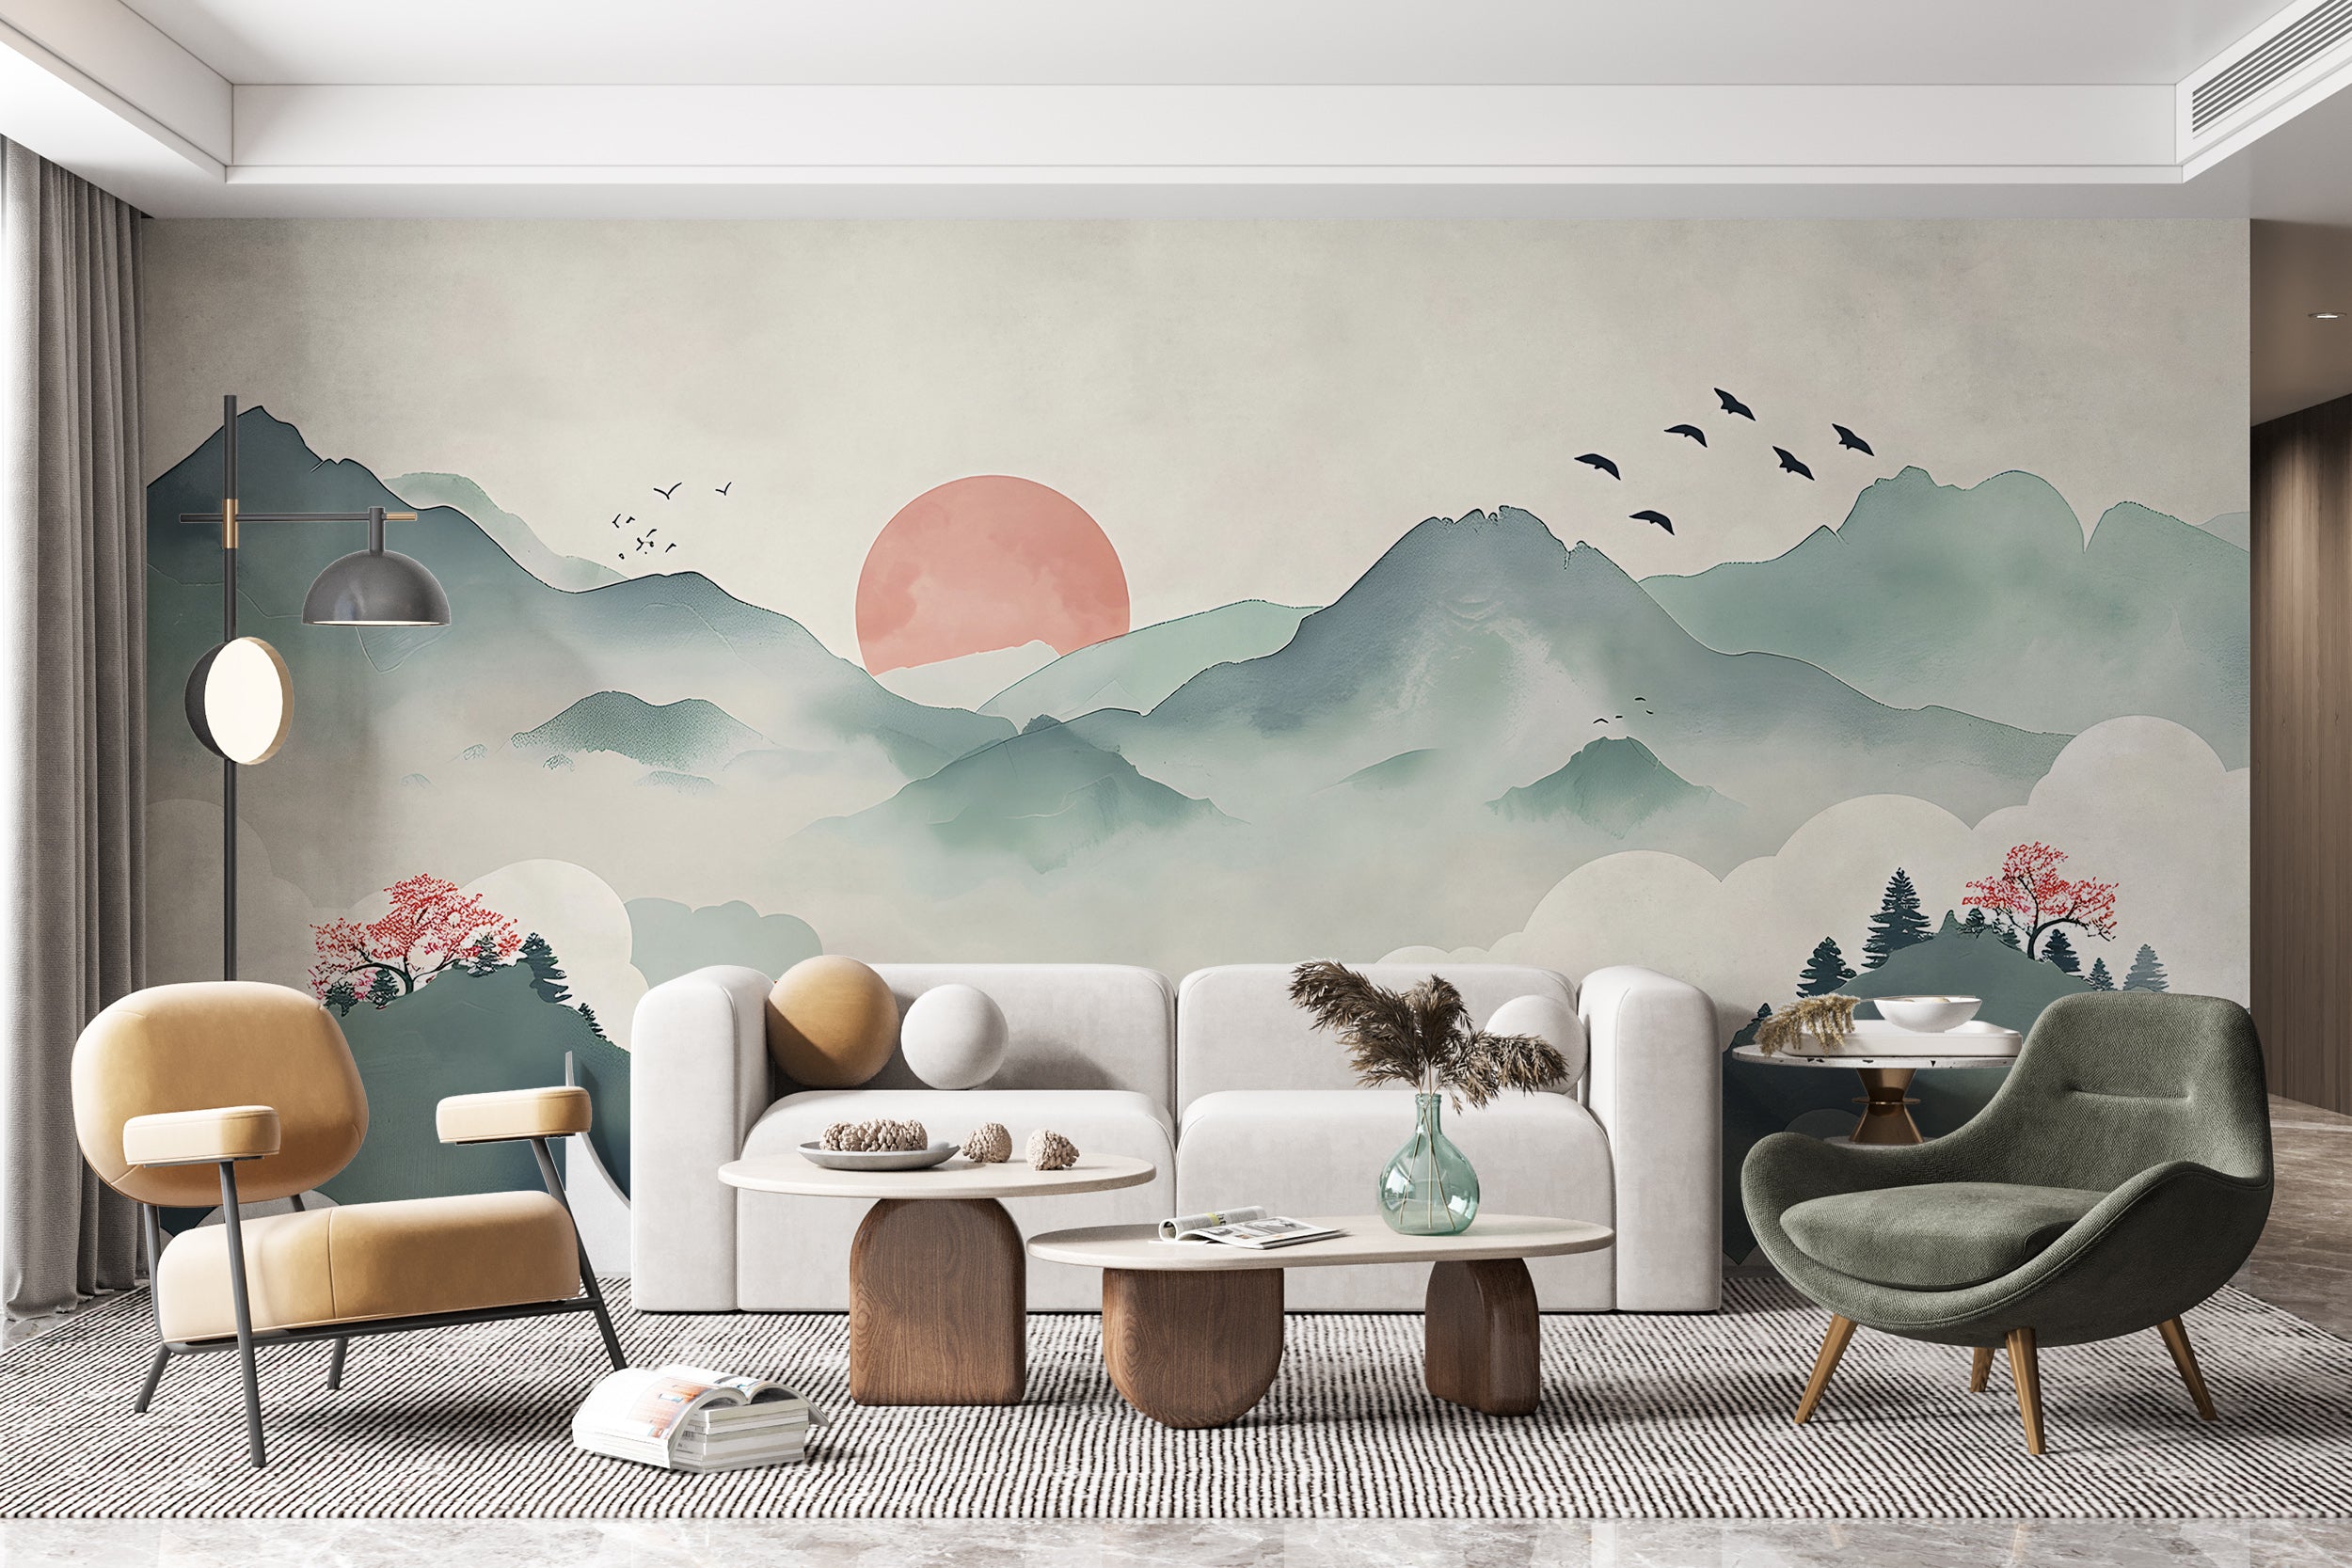 Red Sun Behind Green Mountains Mural, Watercolor Japanese Landscape Wallpaper, Peel and Stick Soft Colors Accent Wall Removable Wall Decal